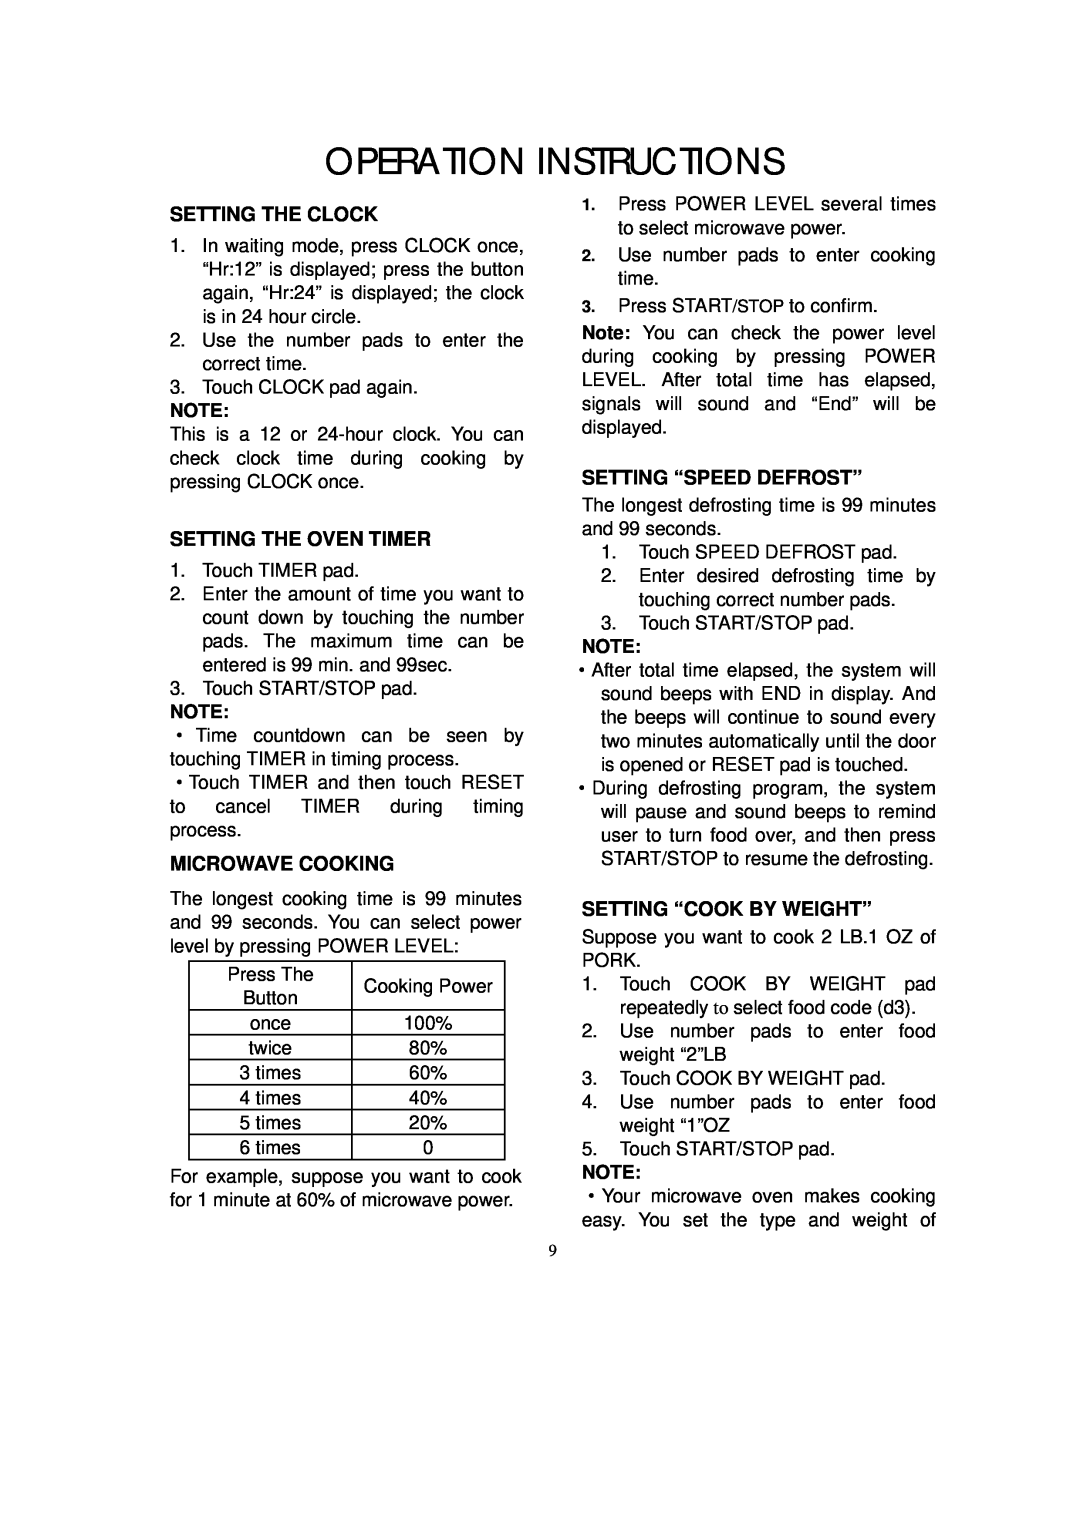 RCA RMW953 Operation Instructions, Setting The Clock, Setting The Oven Timer, Microwave Cooking, Setting “Speed Defrost” 